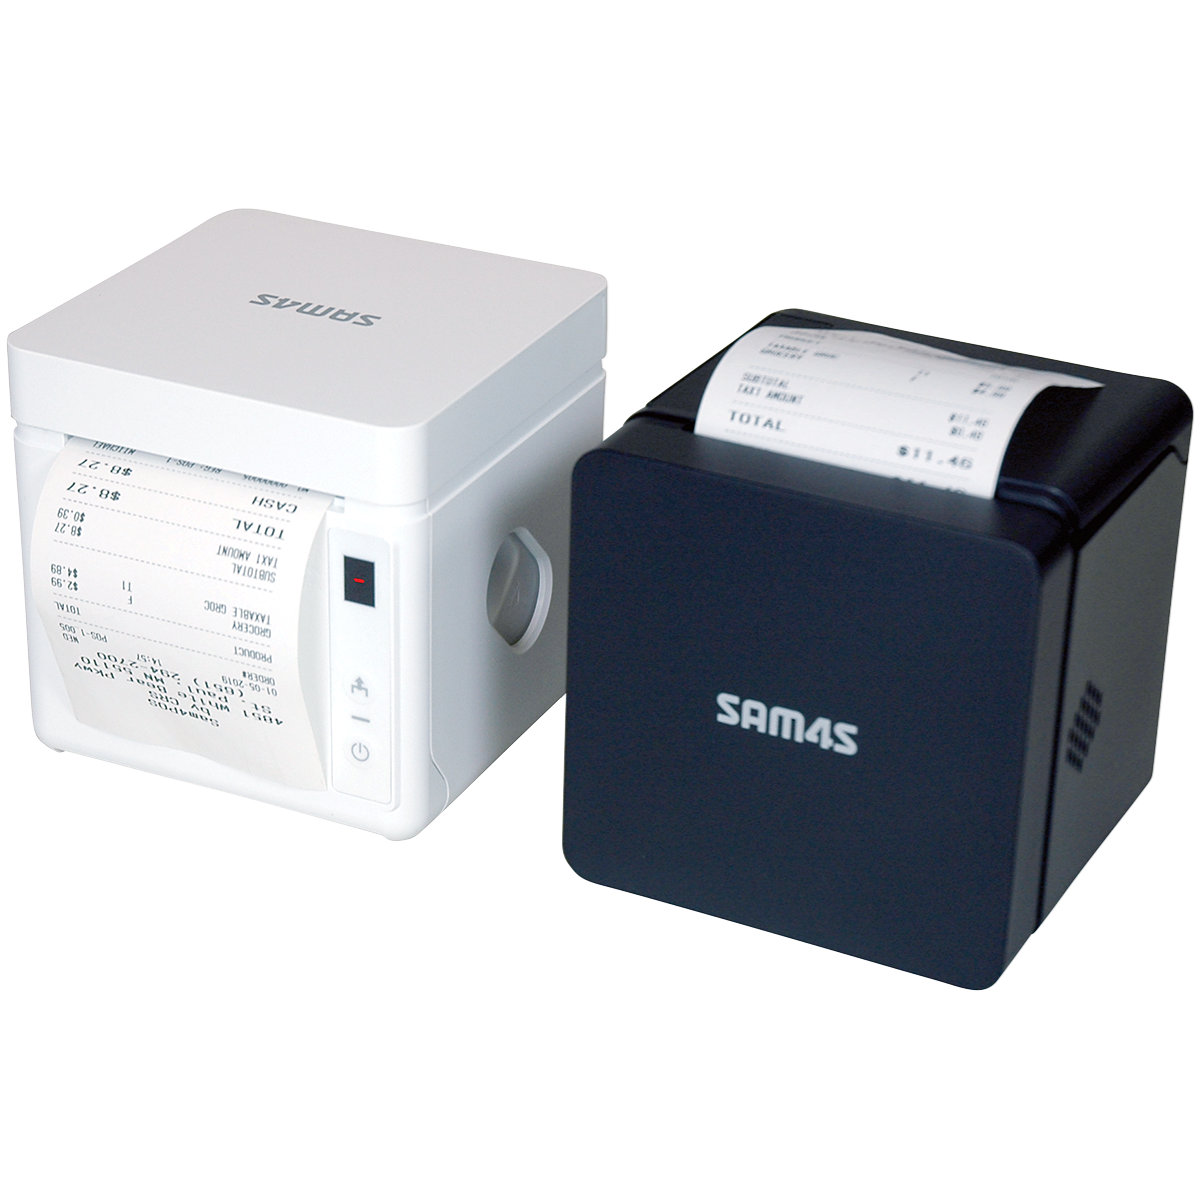 SAM4s Cube Style Thermal Receipt Printer